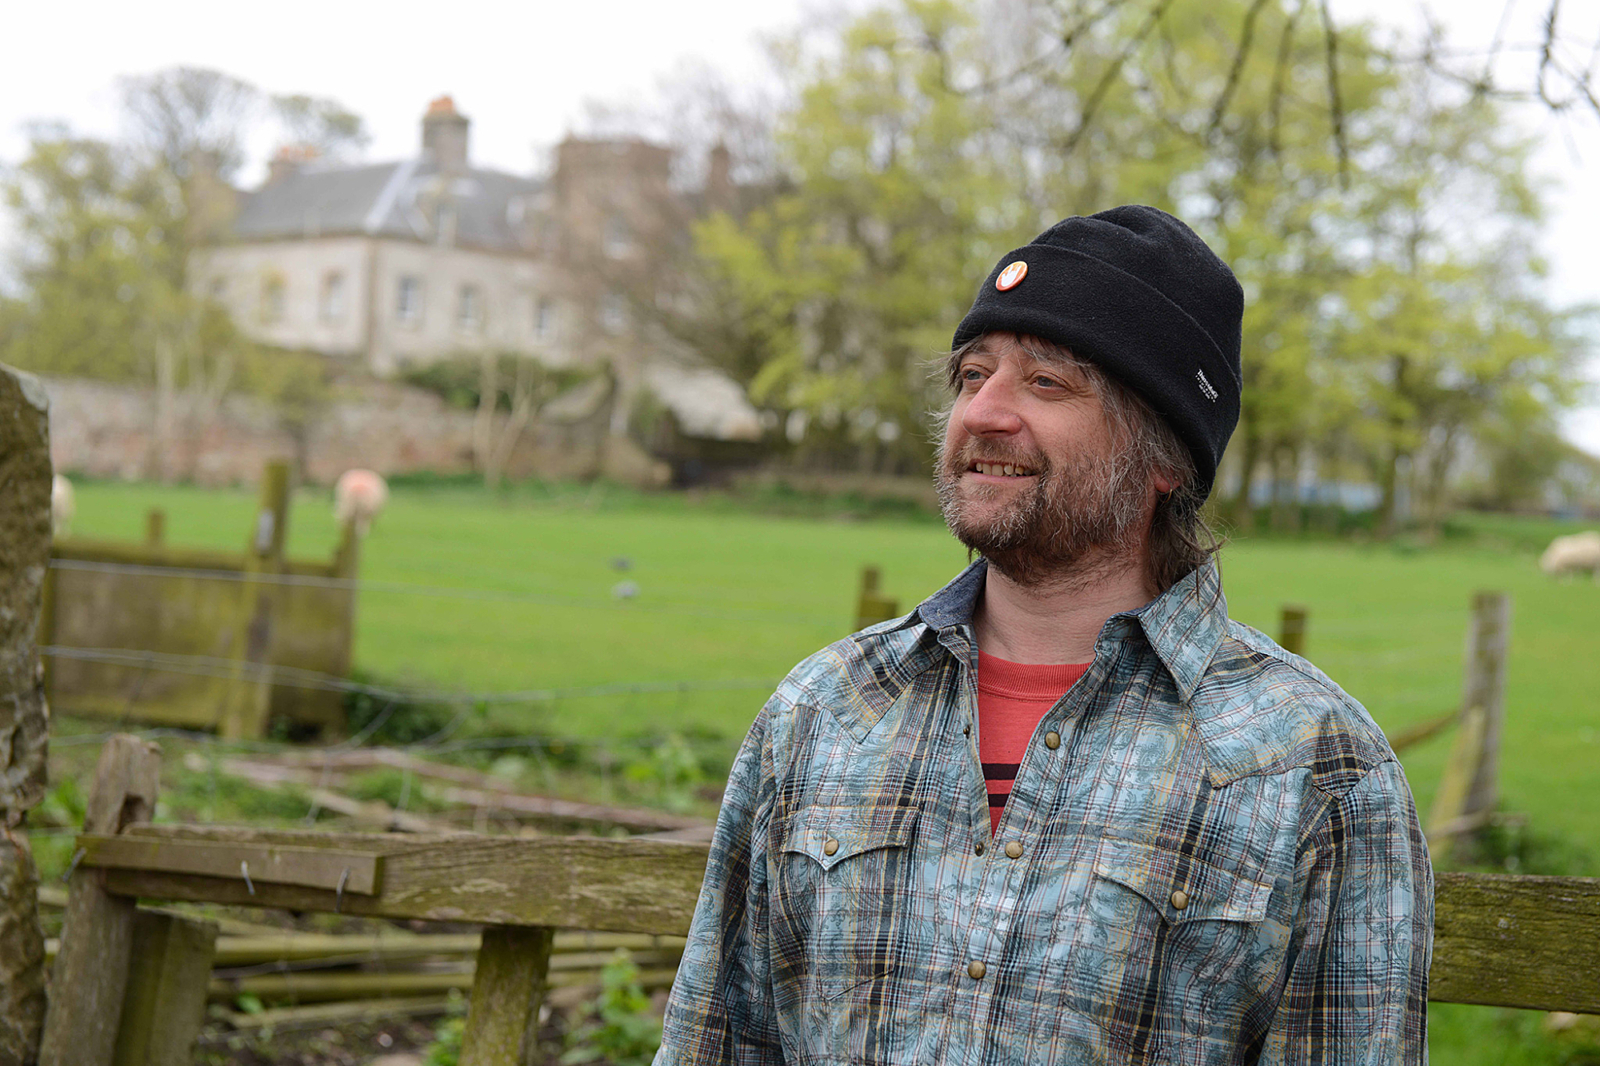 King Creosote: "Life in Scotland is pretty good"